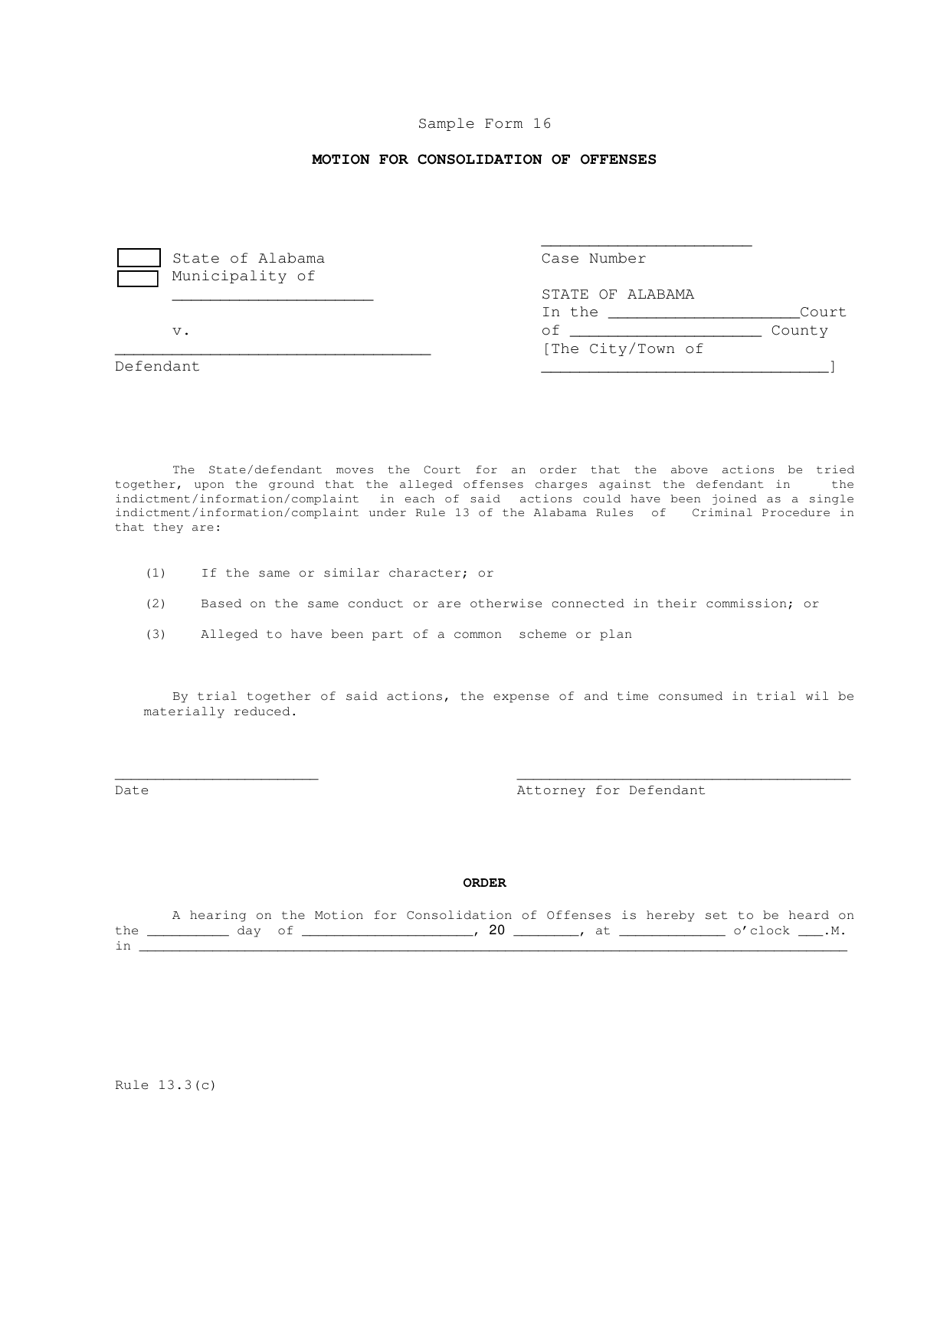 Sample Form 16 Motion for Consolidation of Offenses - Alabama, Page 1